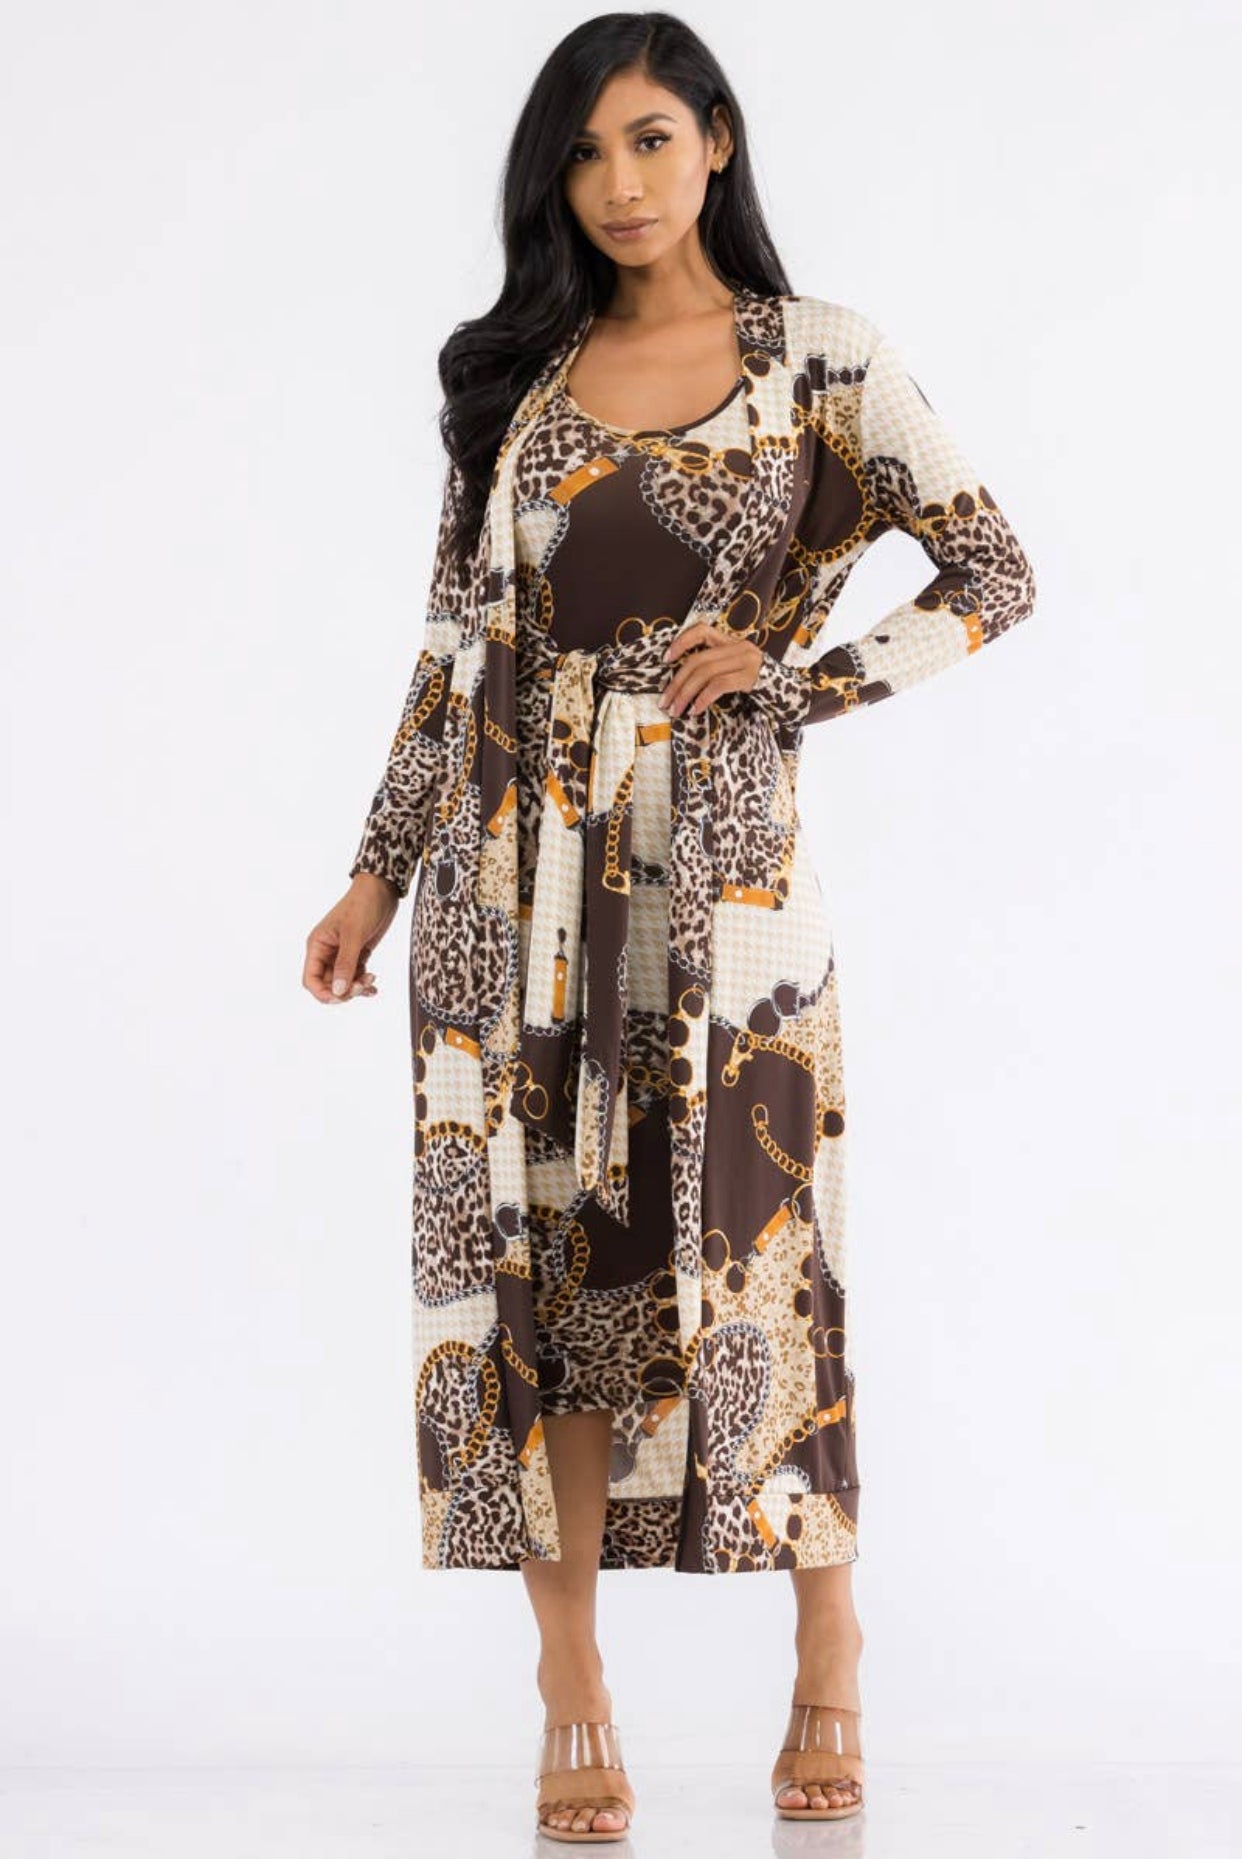 Two-Piece Dress and Cardigan Set, Sizes Small - 1XLarge (Chain Print)